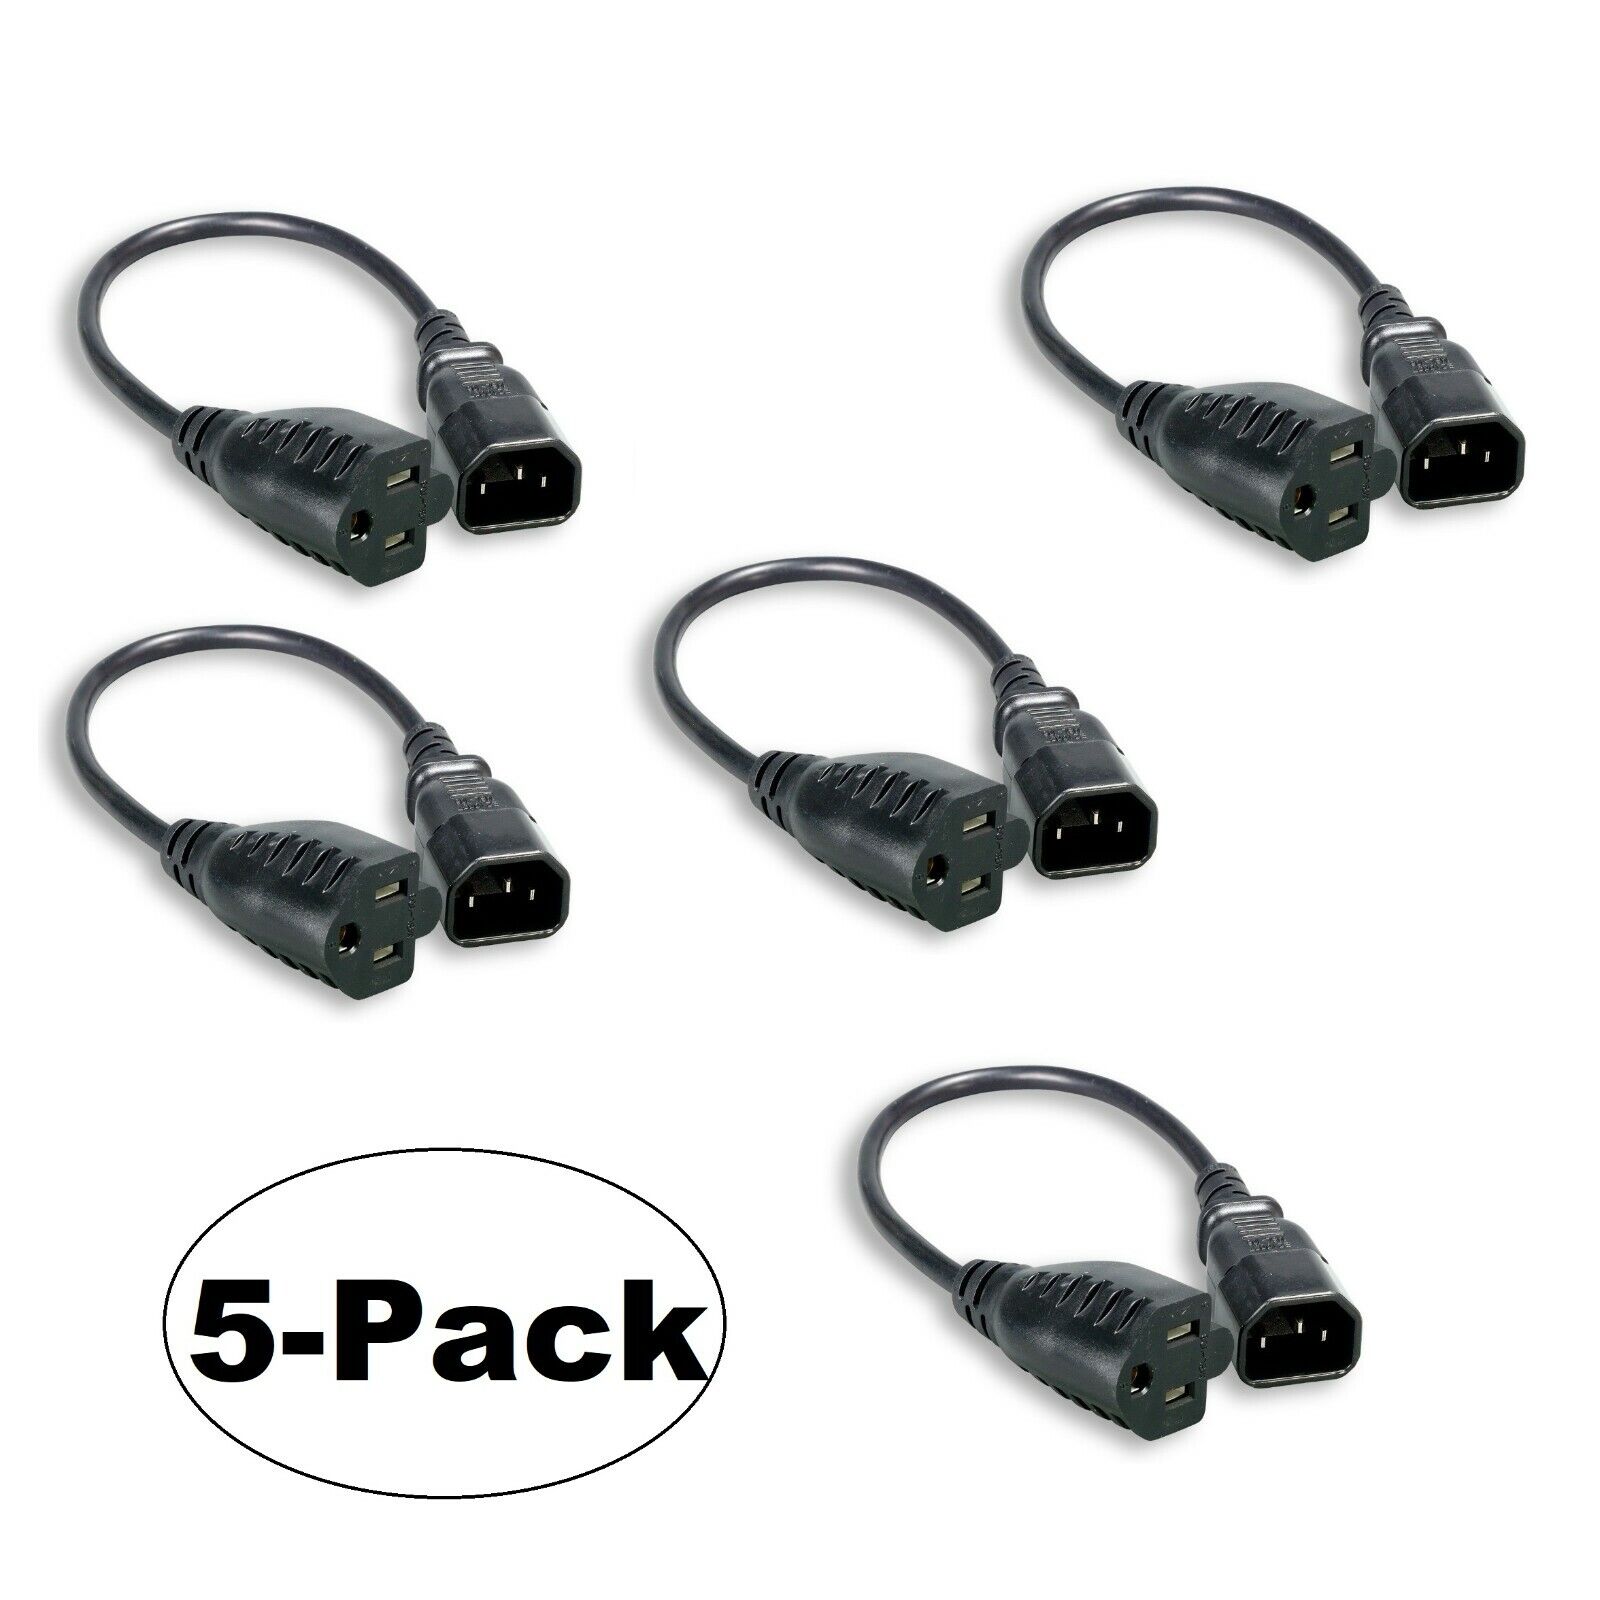 5x 1FT IEC320 C14 to NEMA 5-15R 125V AC 10A 10 Amp Monitor PC Power Cord Cable